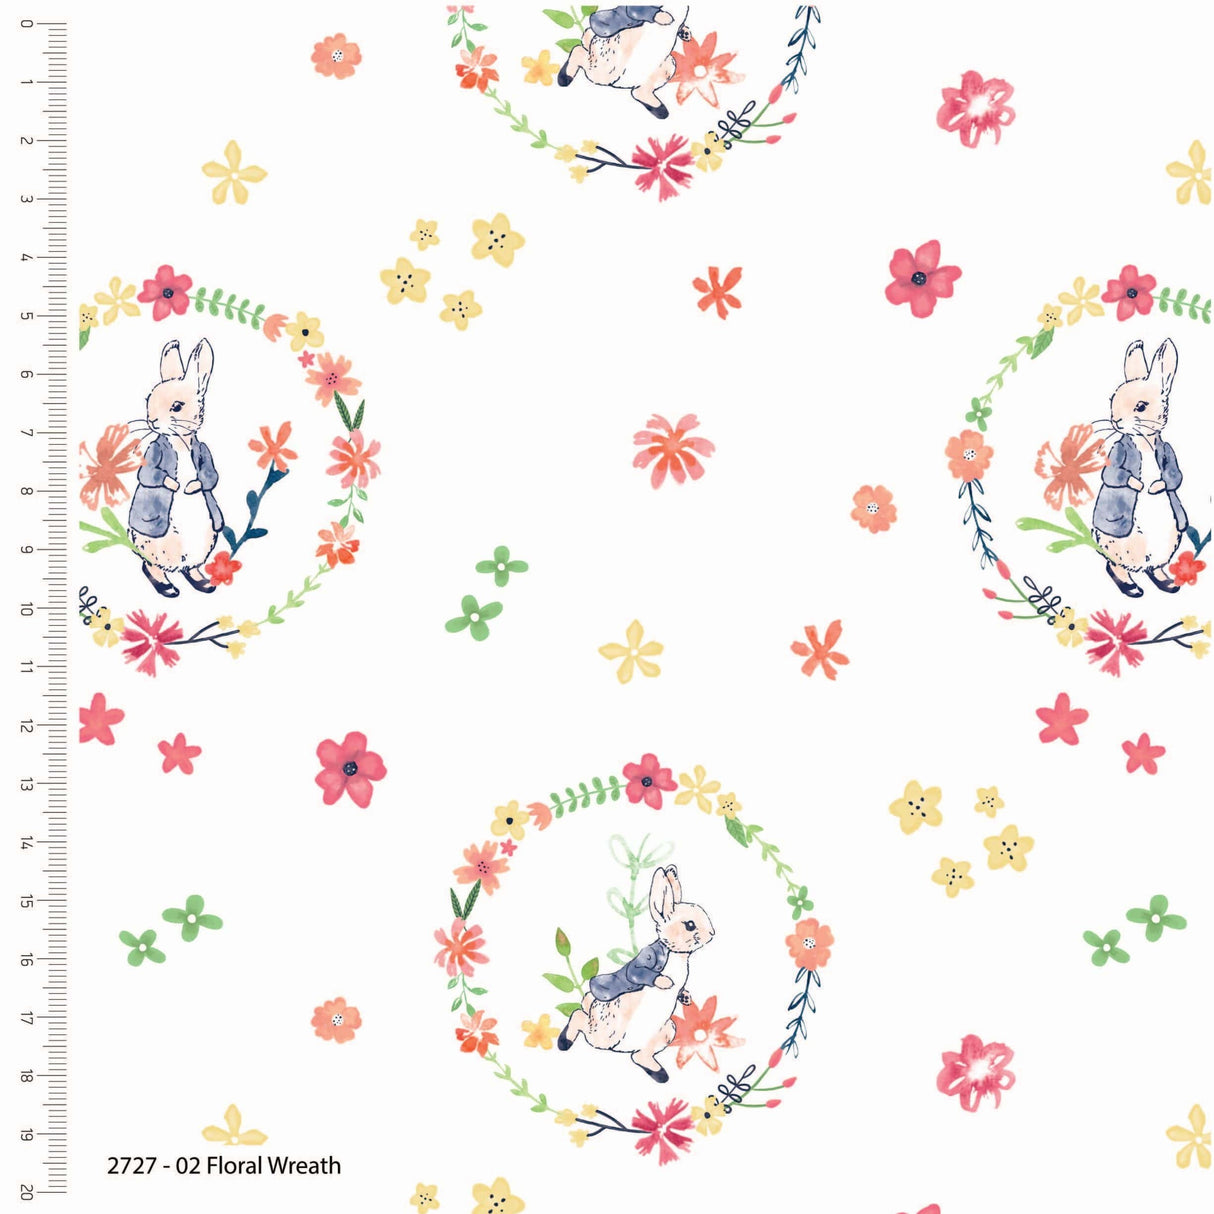 Craft Cotton Company Fabric Floral Wreath (2727-02) Peter Rabbit Flowers and Dream Fabric